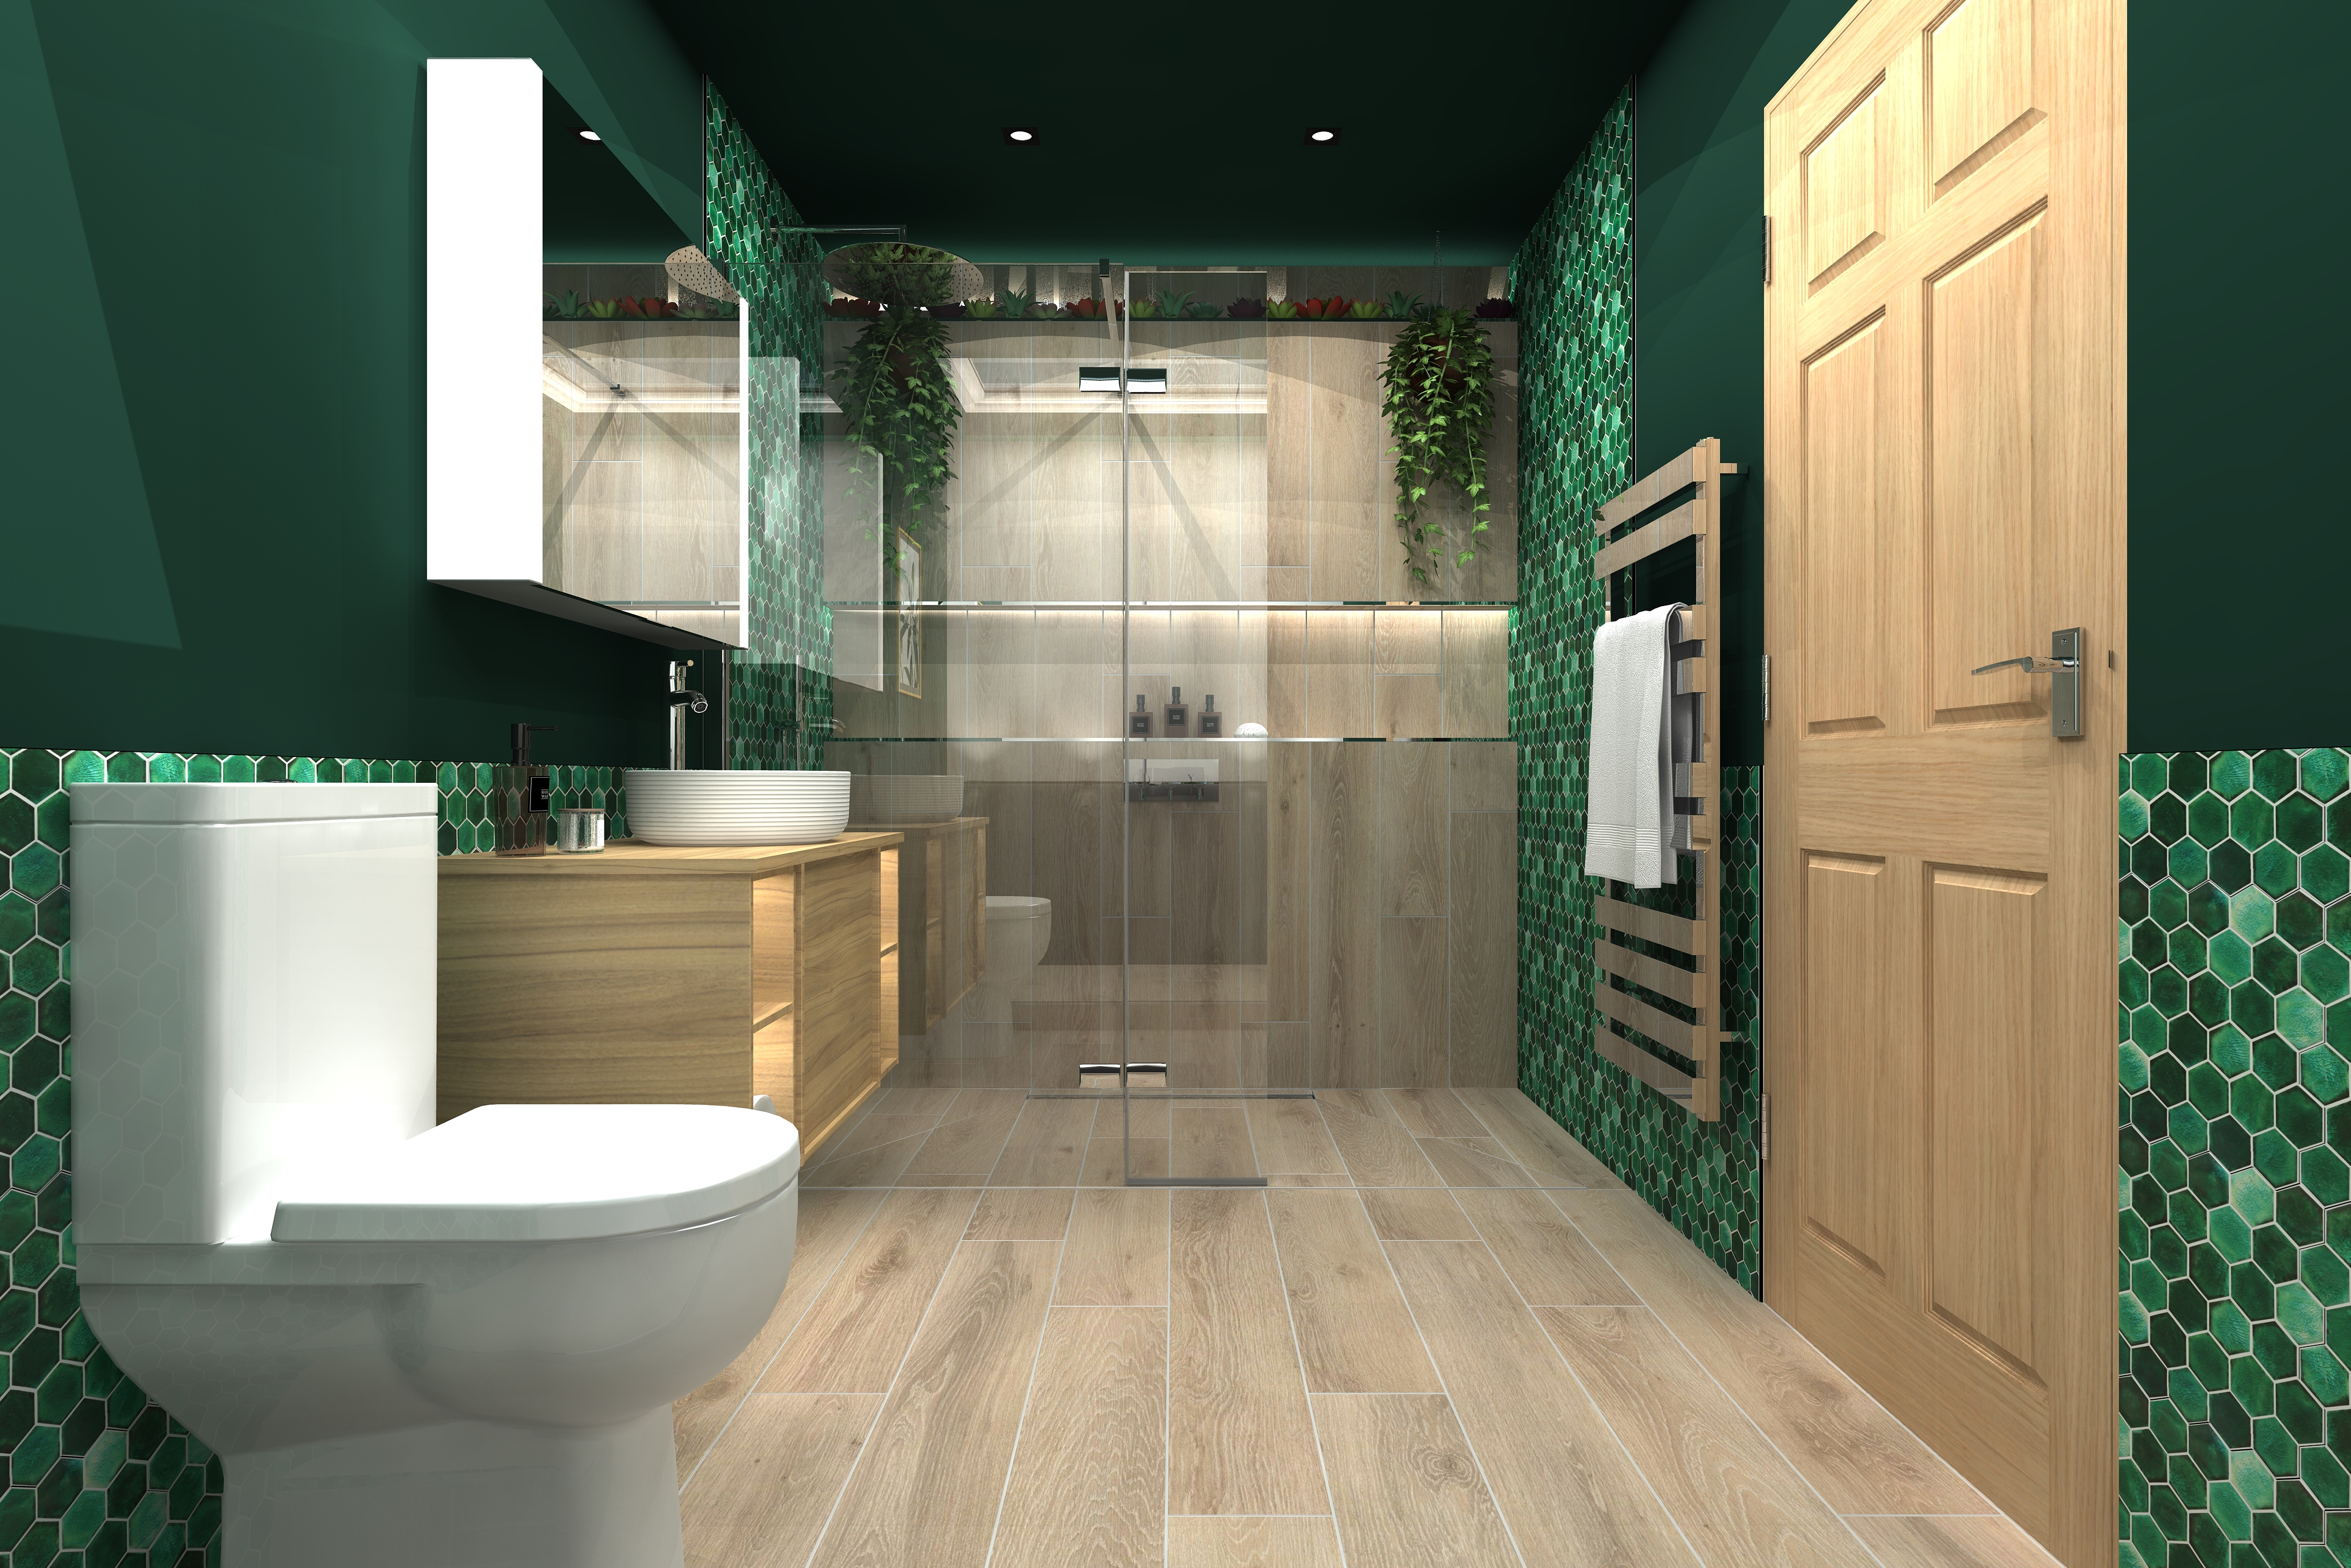 Digital lifestyle image of Taurus inspired bathroom, with a chrome plated raditor, glass shower enclosure with wall mounted chrome shower head and wall mounted foliage